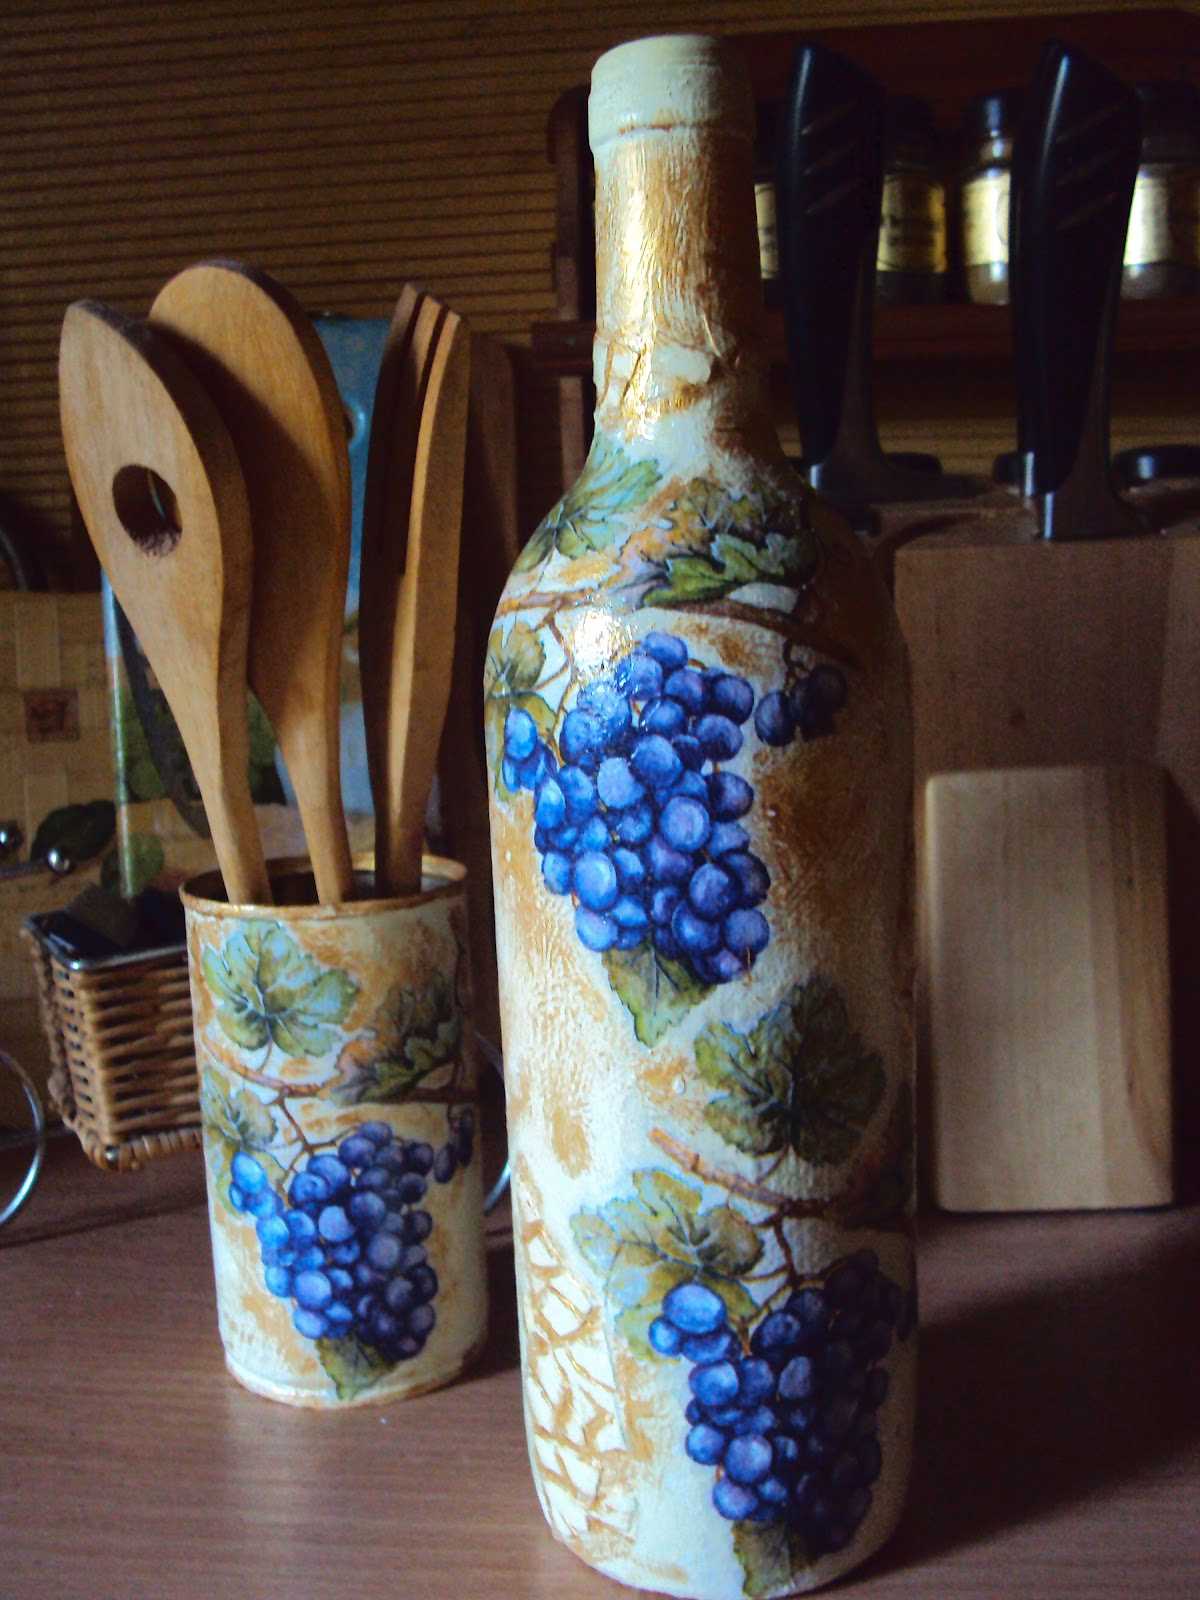 the idea of ​​beautifully decorating glass bottles with paints